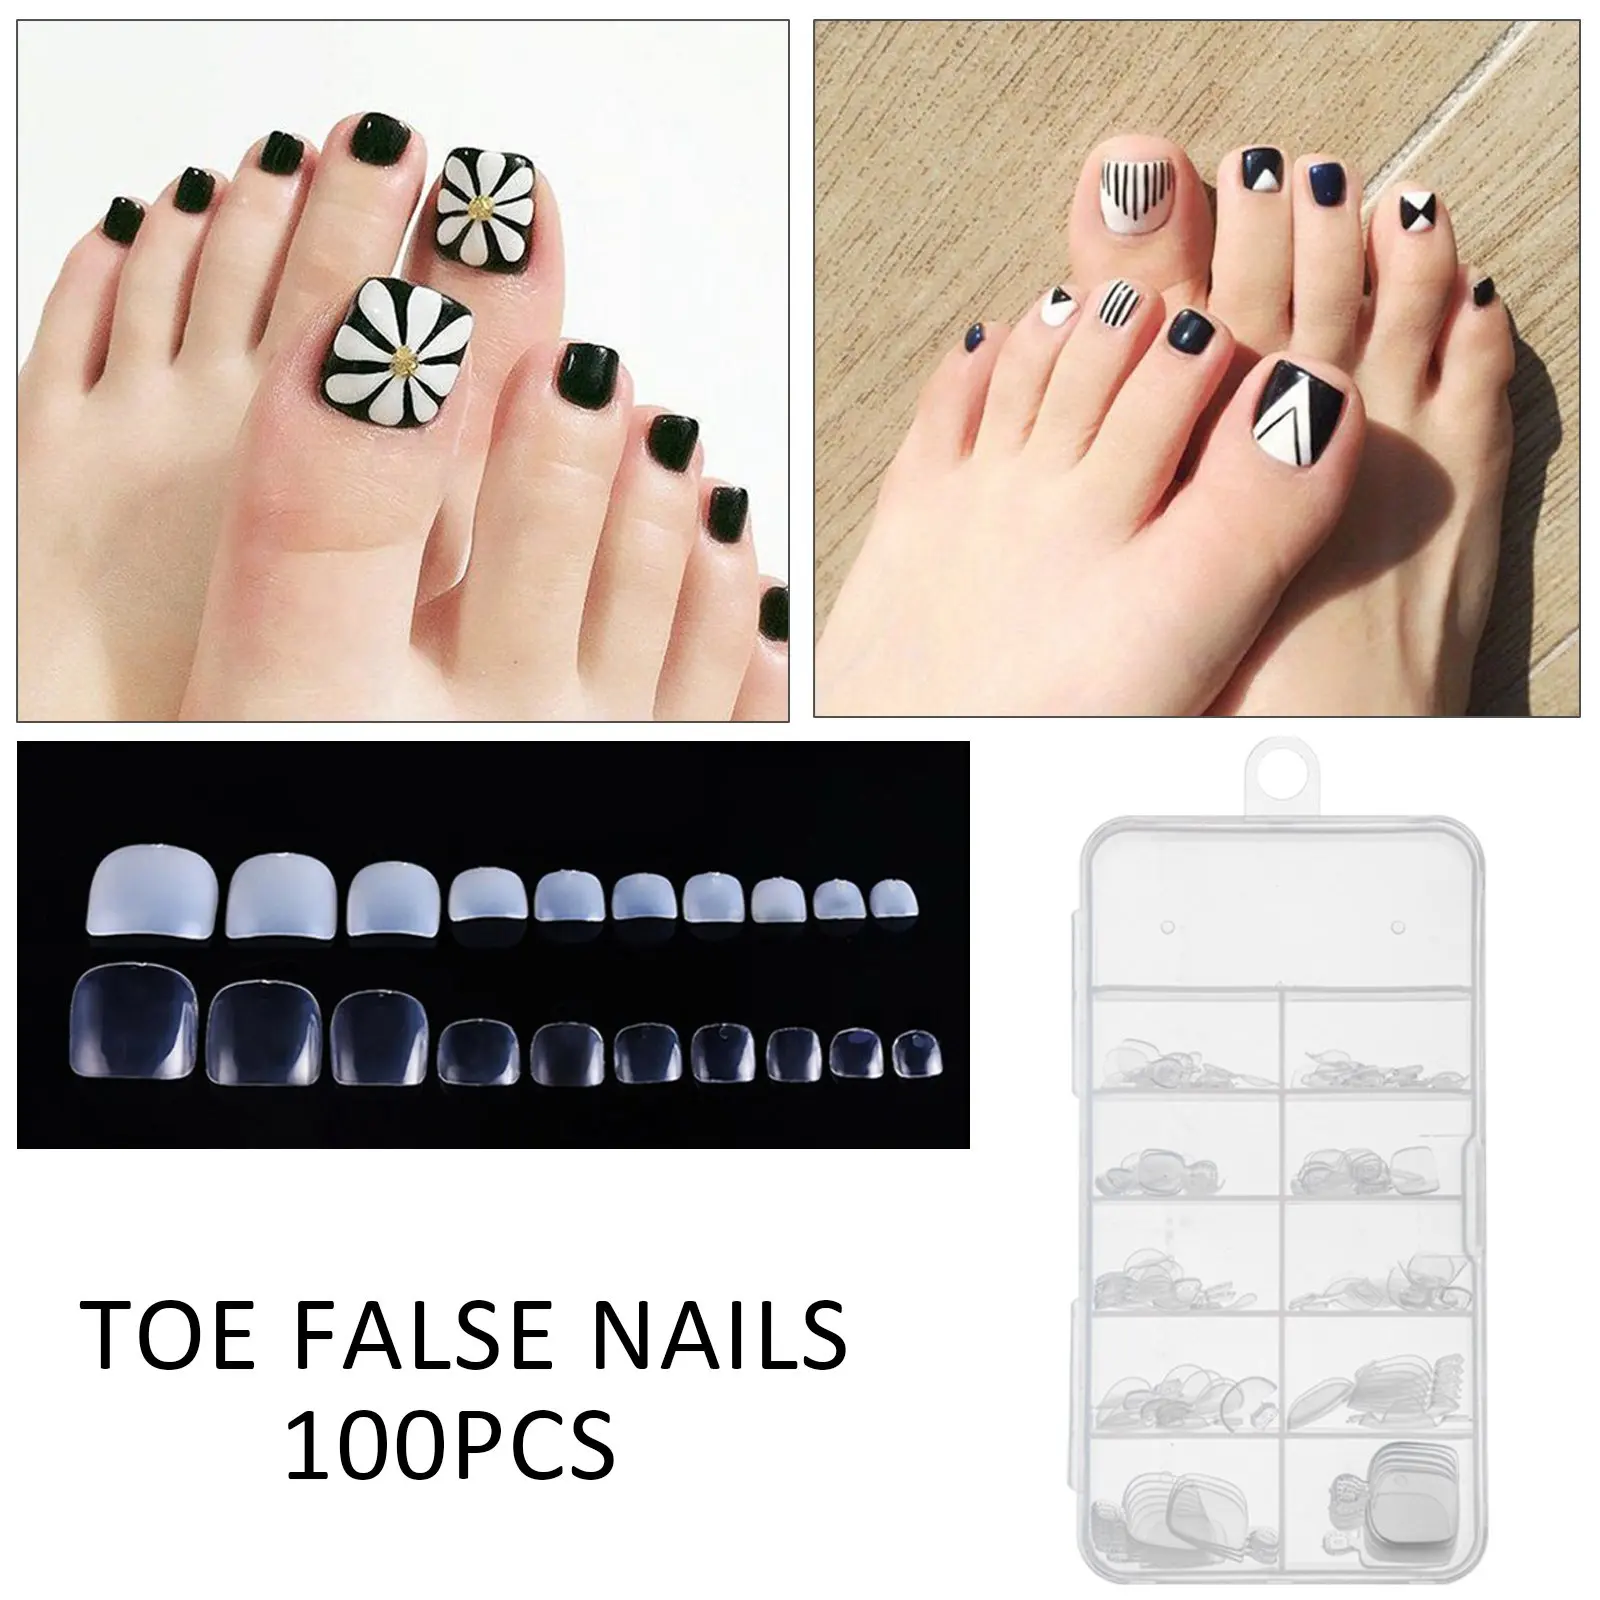 Long, Fake Toenails Are in This Summer, So Look Down at Your Own Risk